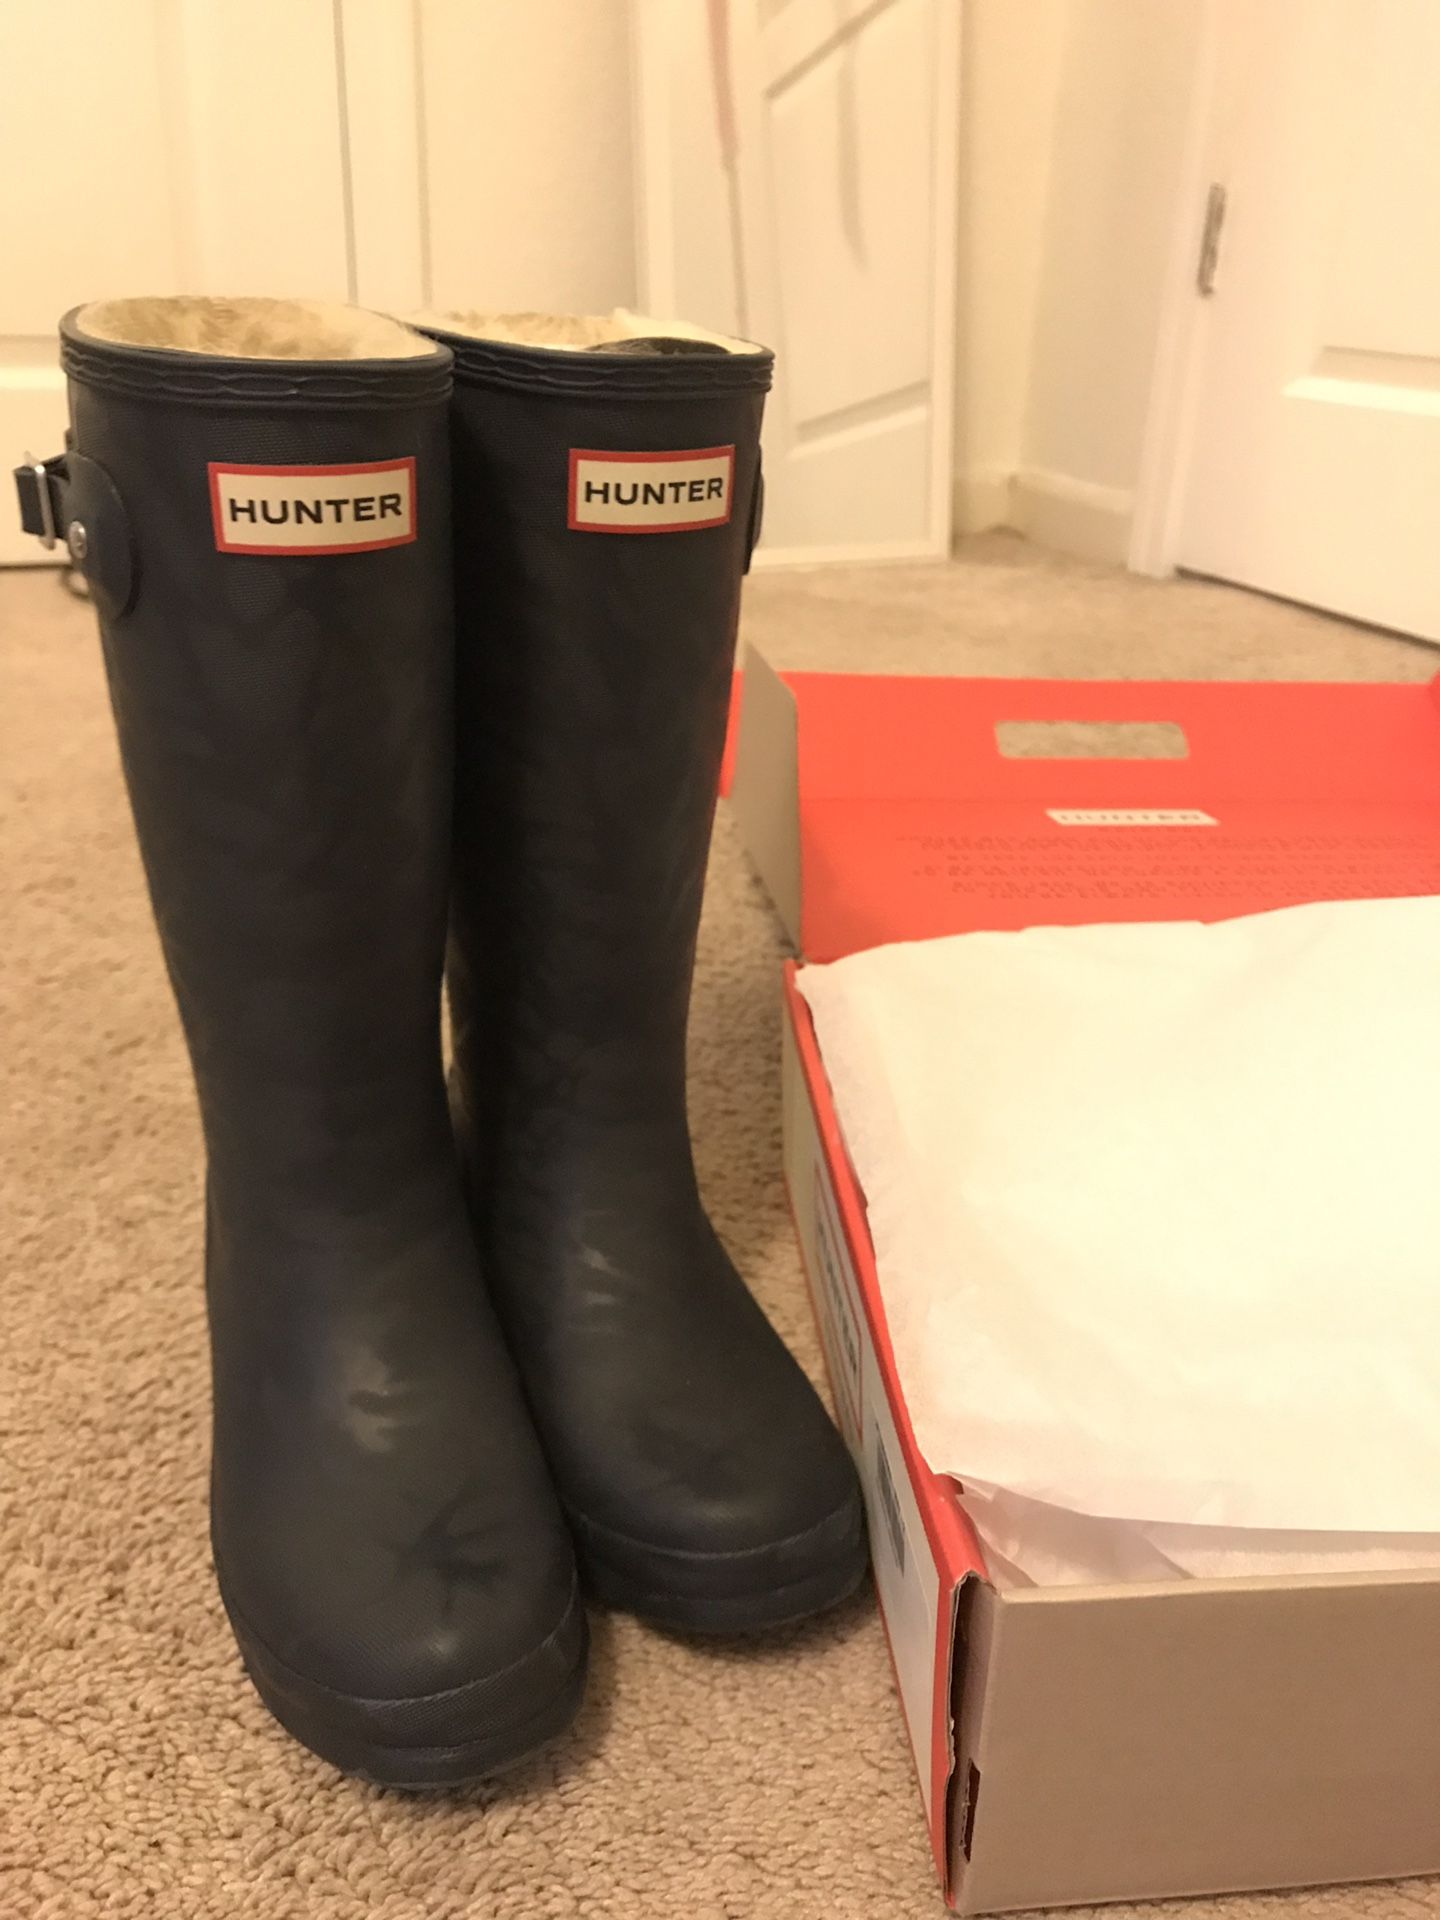 Hunter Navy Blue Insulated Rain Boots in size 2 Kids Brand New